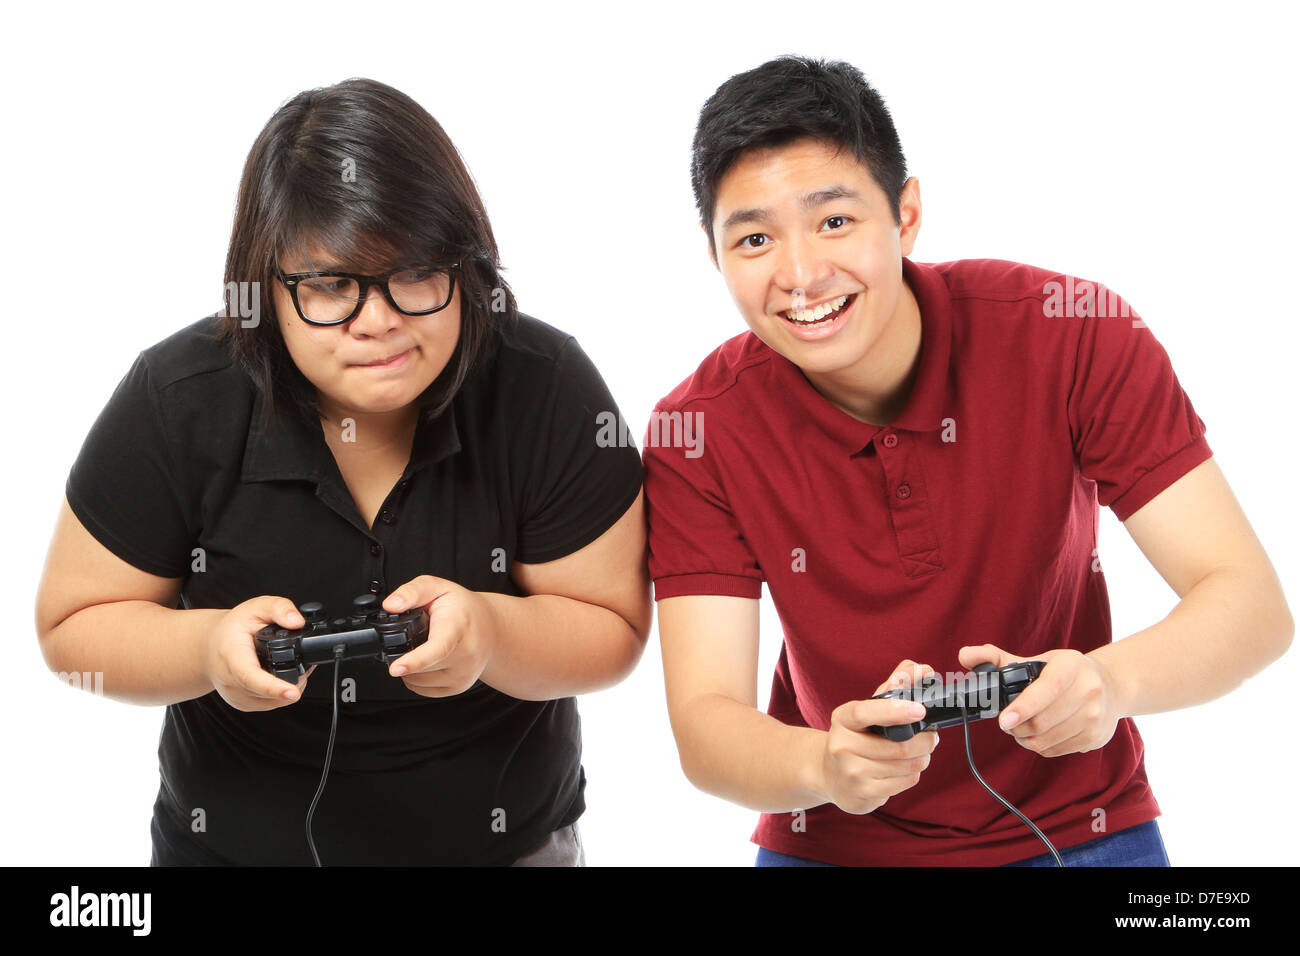 Teenagers competitively playing a video game Stock Photo